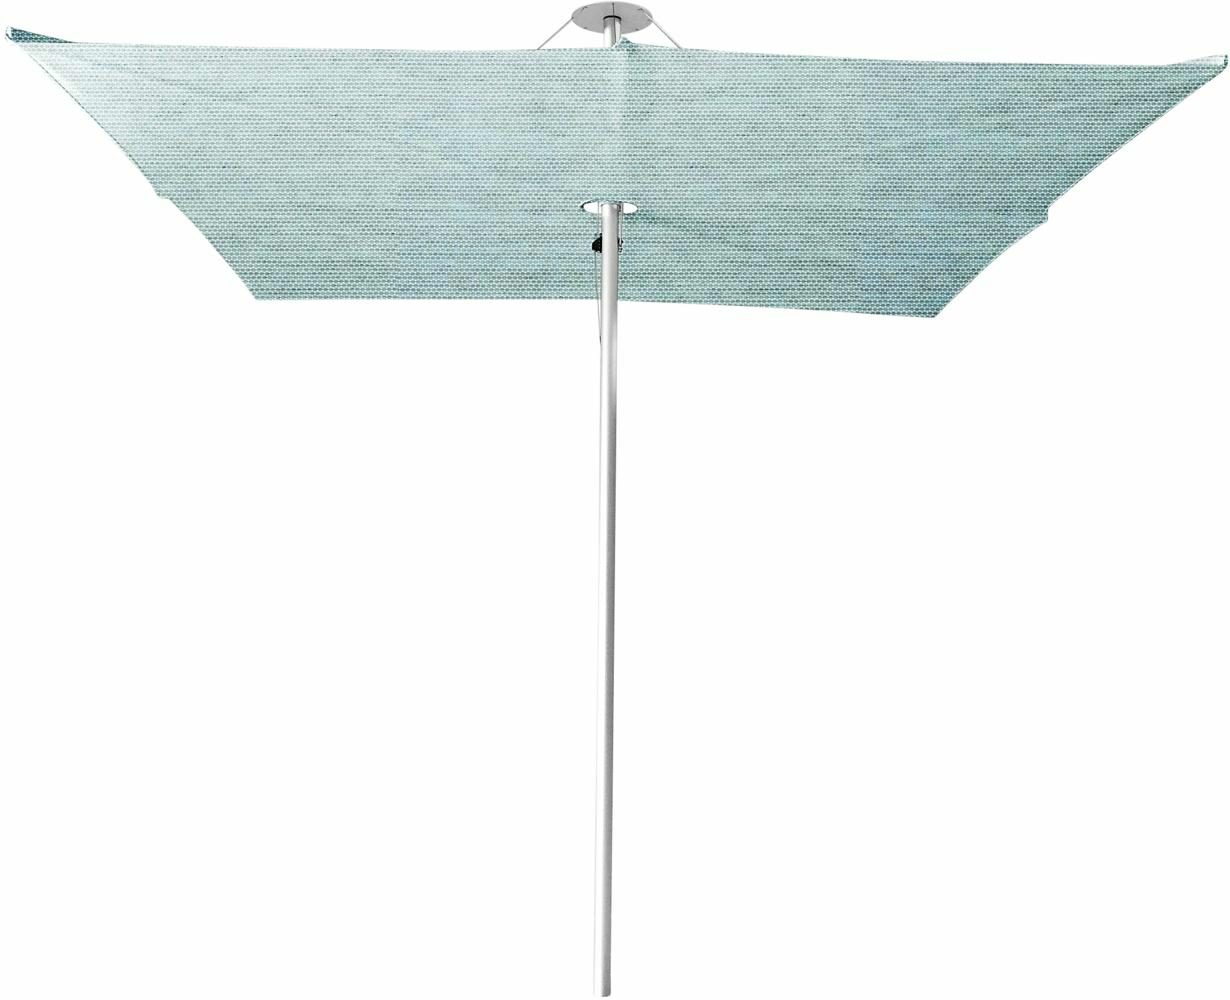 Infina center post umbrella, 3 m square, with frame in Aluminum and Colorum Curacao canopy.